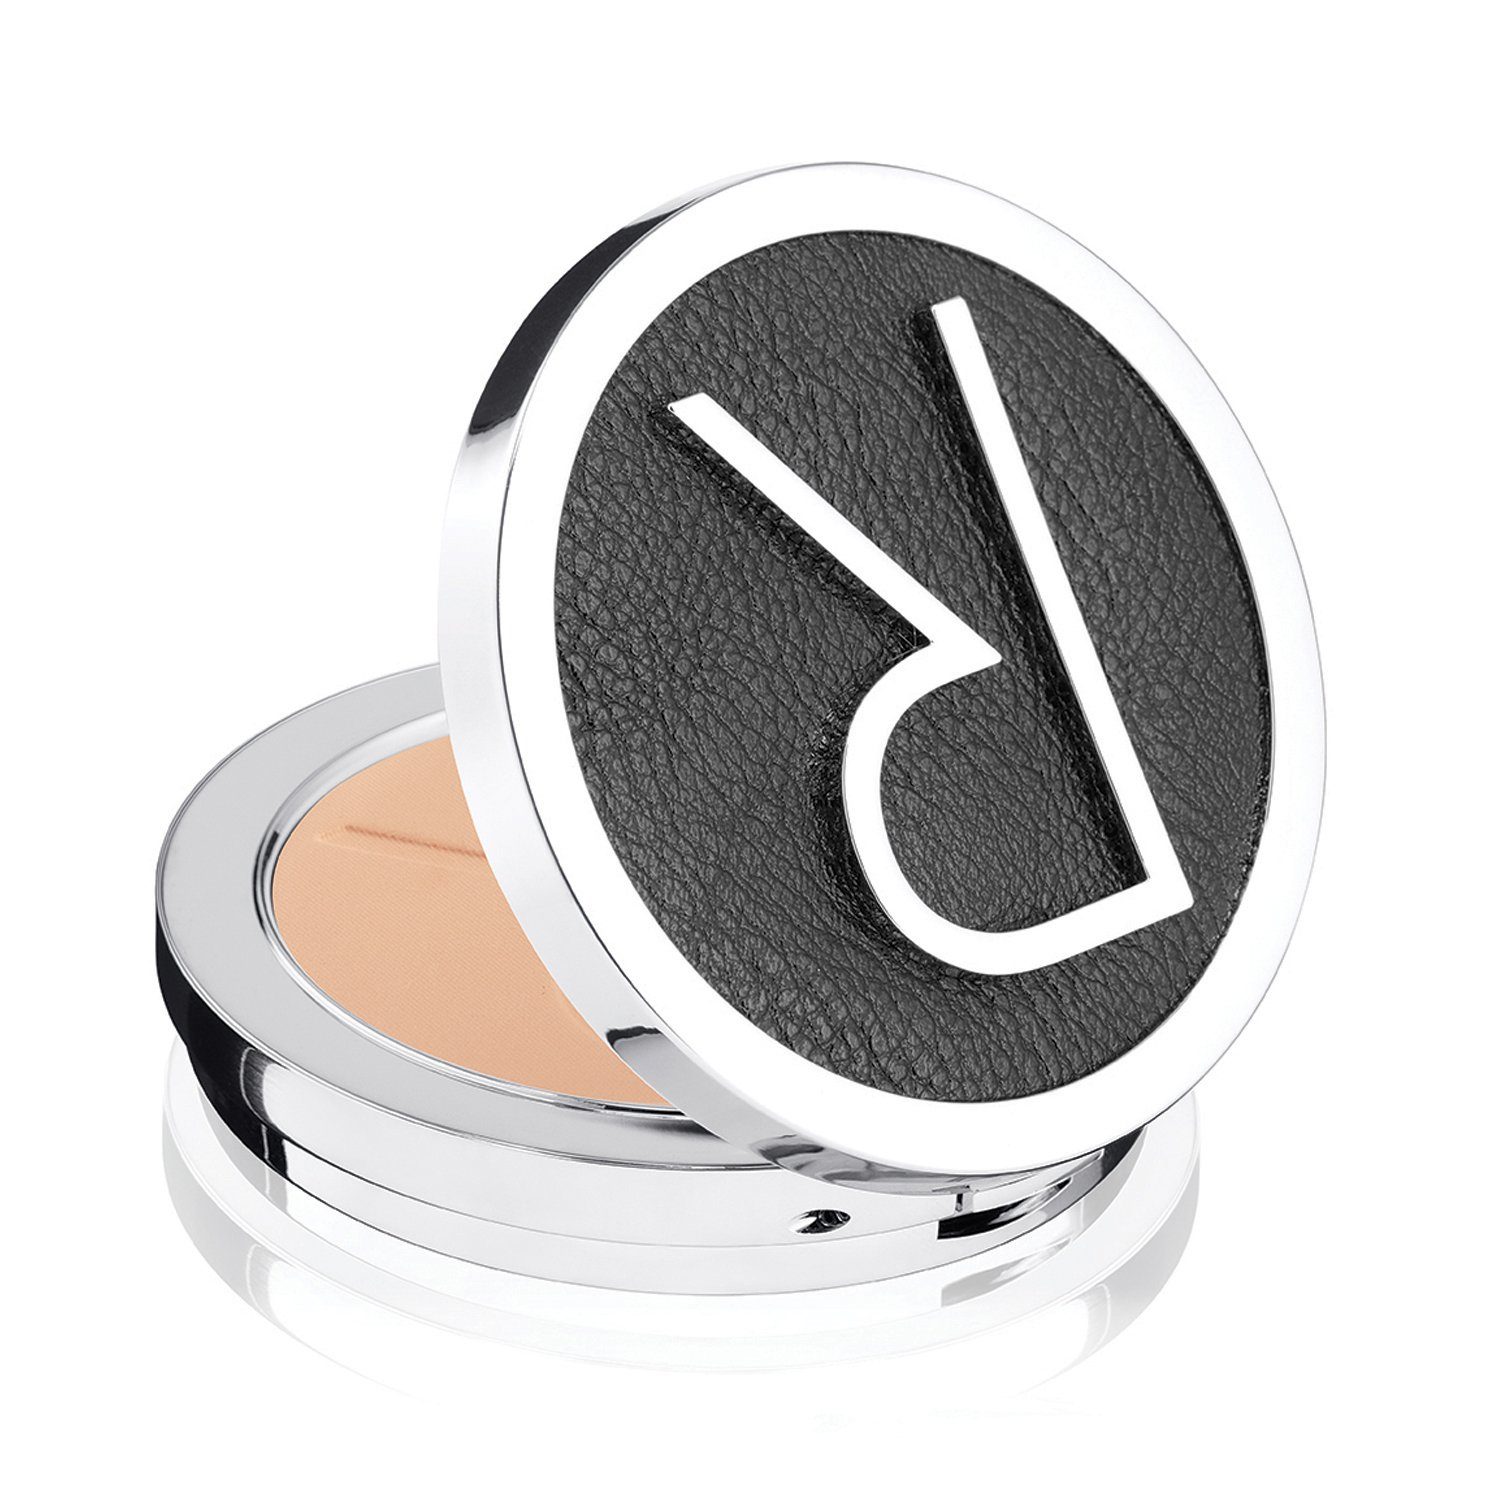 Puder Rodial Powder Puder Glass Rodial Pressed